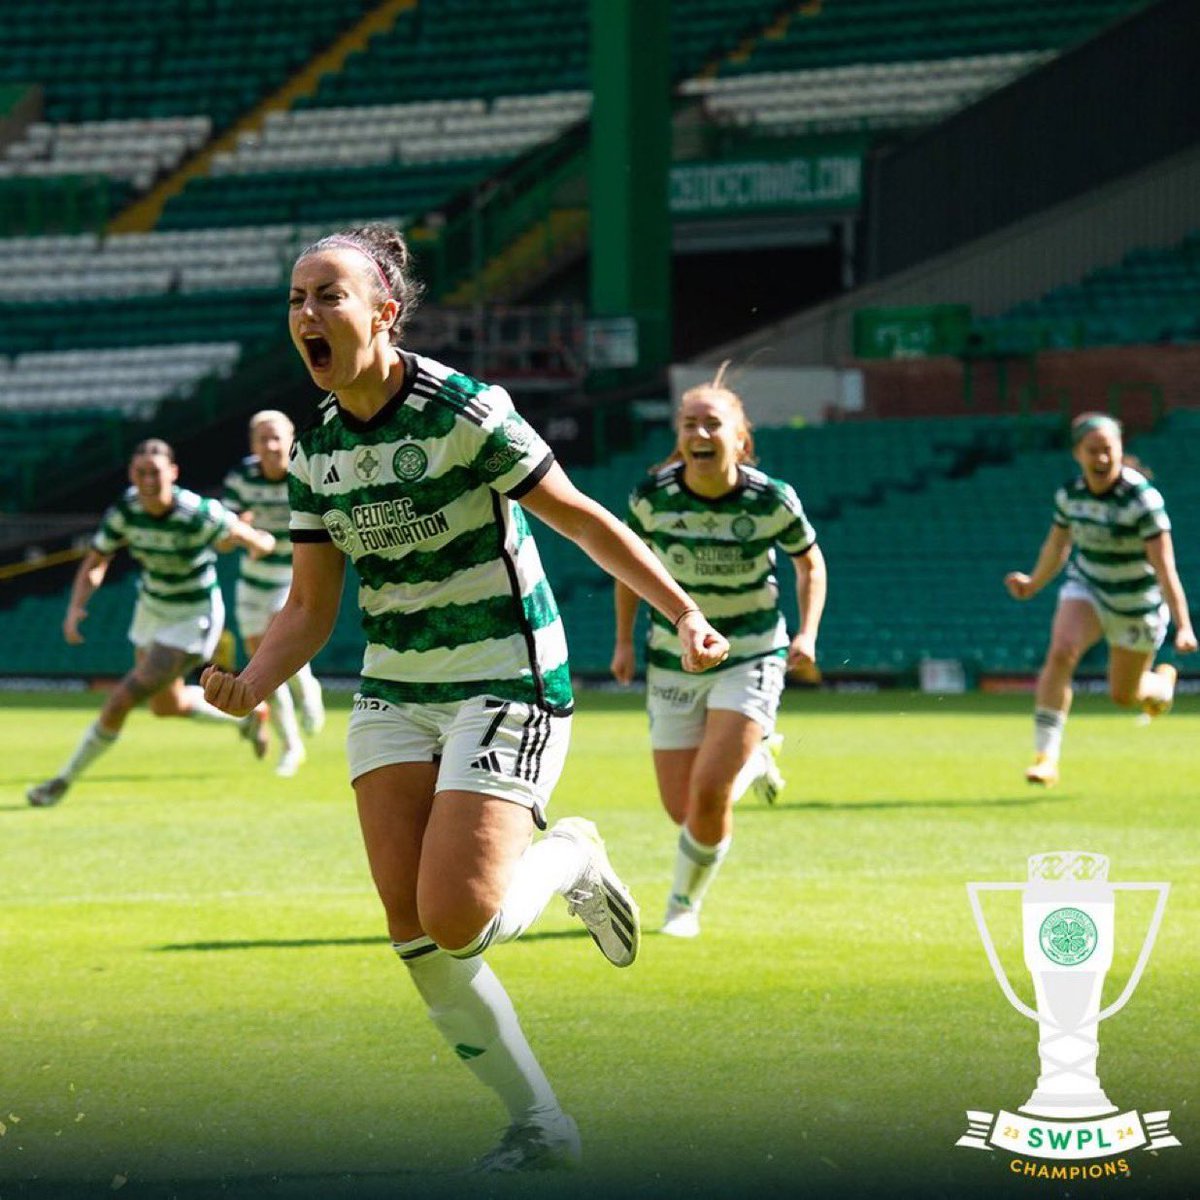 She’s one of our own!
Ccongratulations to Morgan Academy former pupil @amygallacherr who scored a dramatic 90th minute winner to clinch the Women’s SWPL 1 title for her club @CelticFCWomen yesterday. 
#iamambitious #inevergiveup  🤩